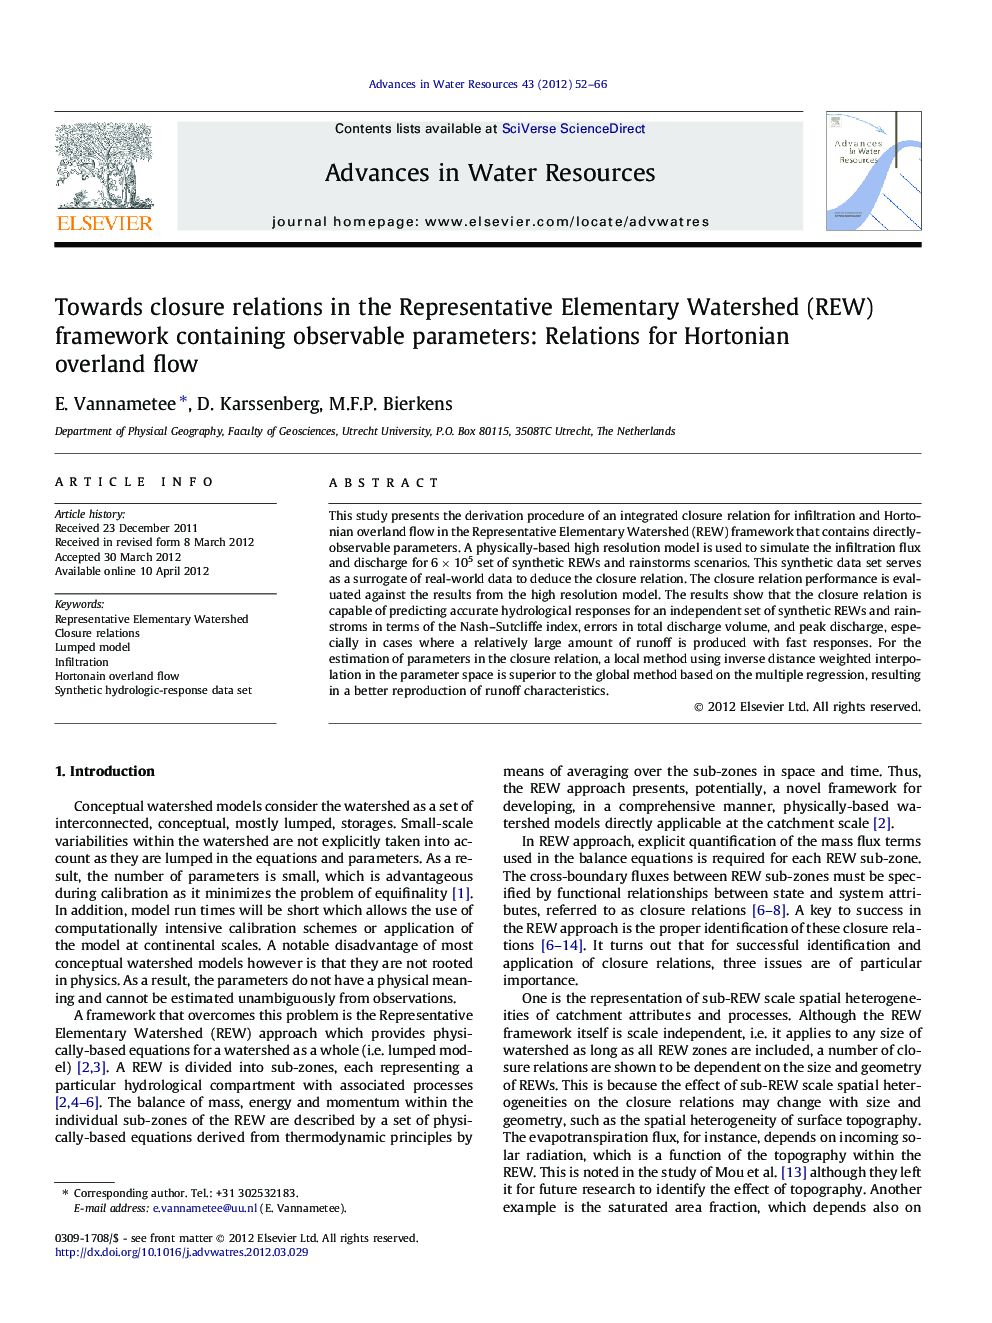 Towards closure relations in the Representative Elementary Watershed (REW) framework containing observable parameters: Relations for Hortonian overland flow